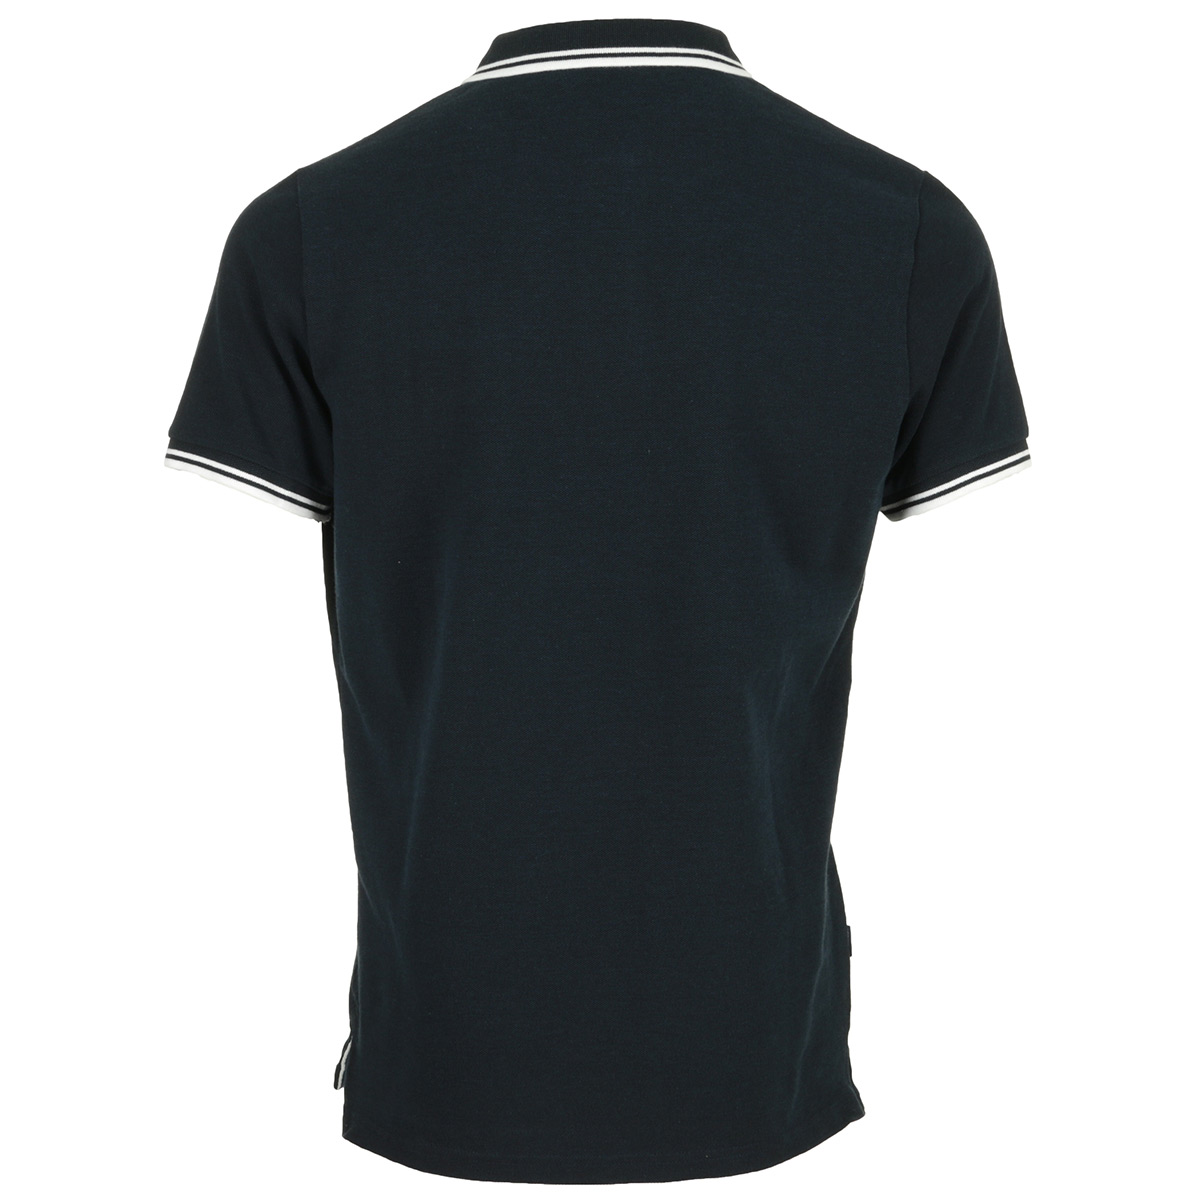 Superdry Classic Poolside Pique Polo